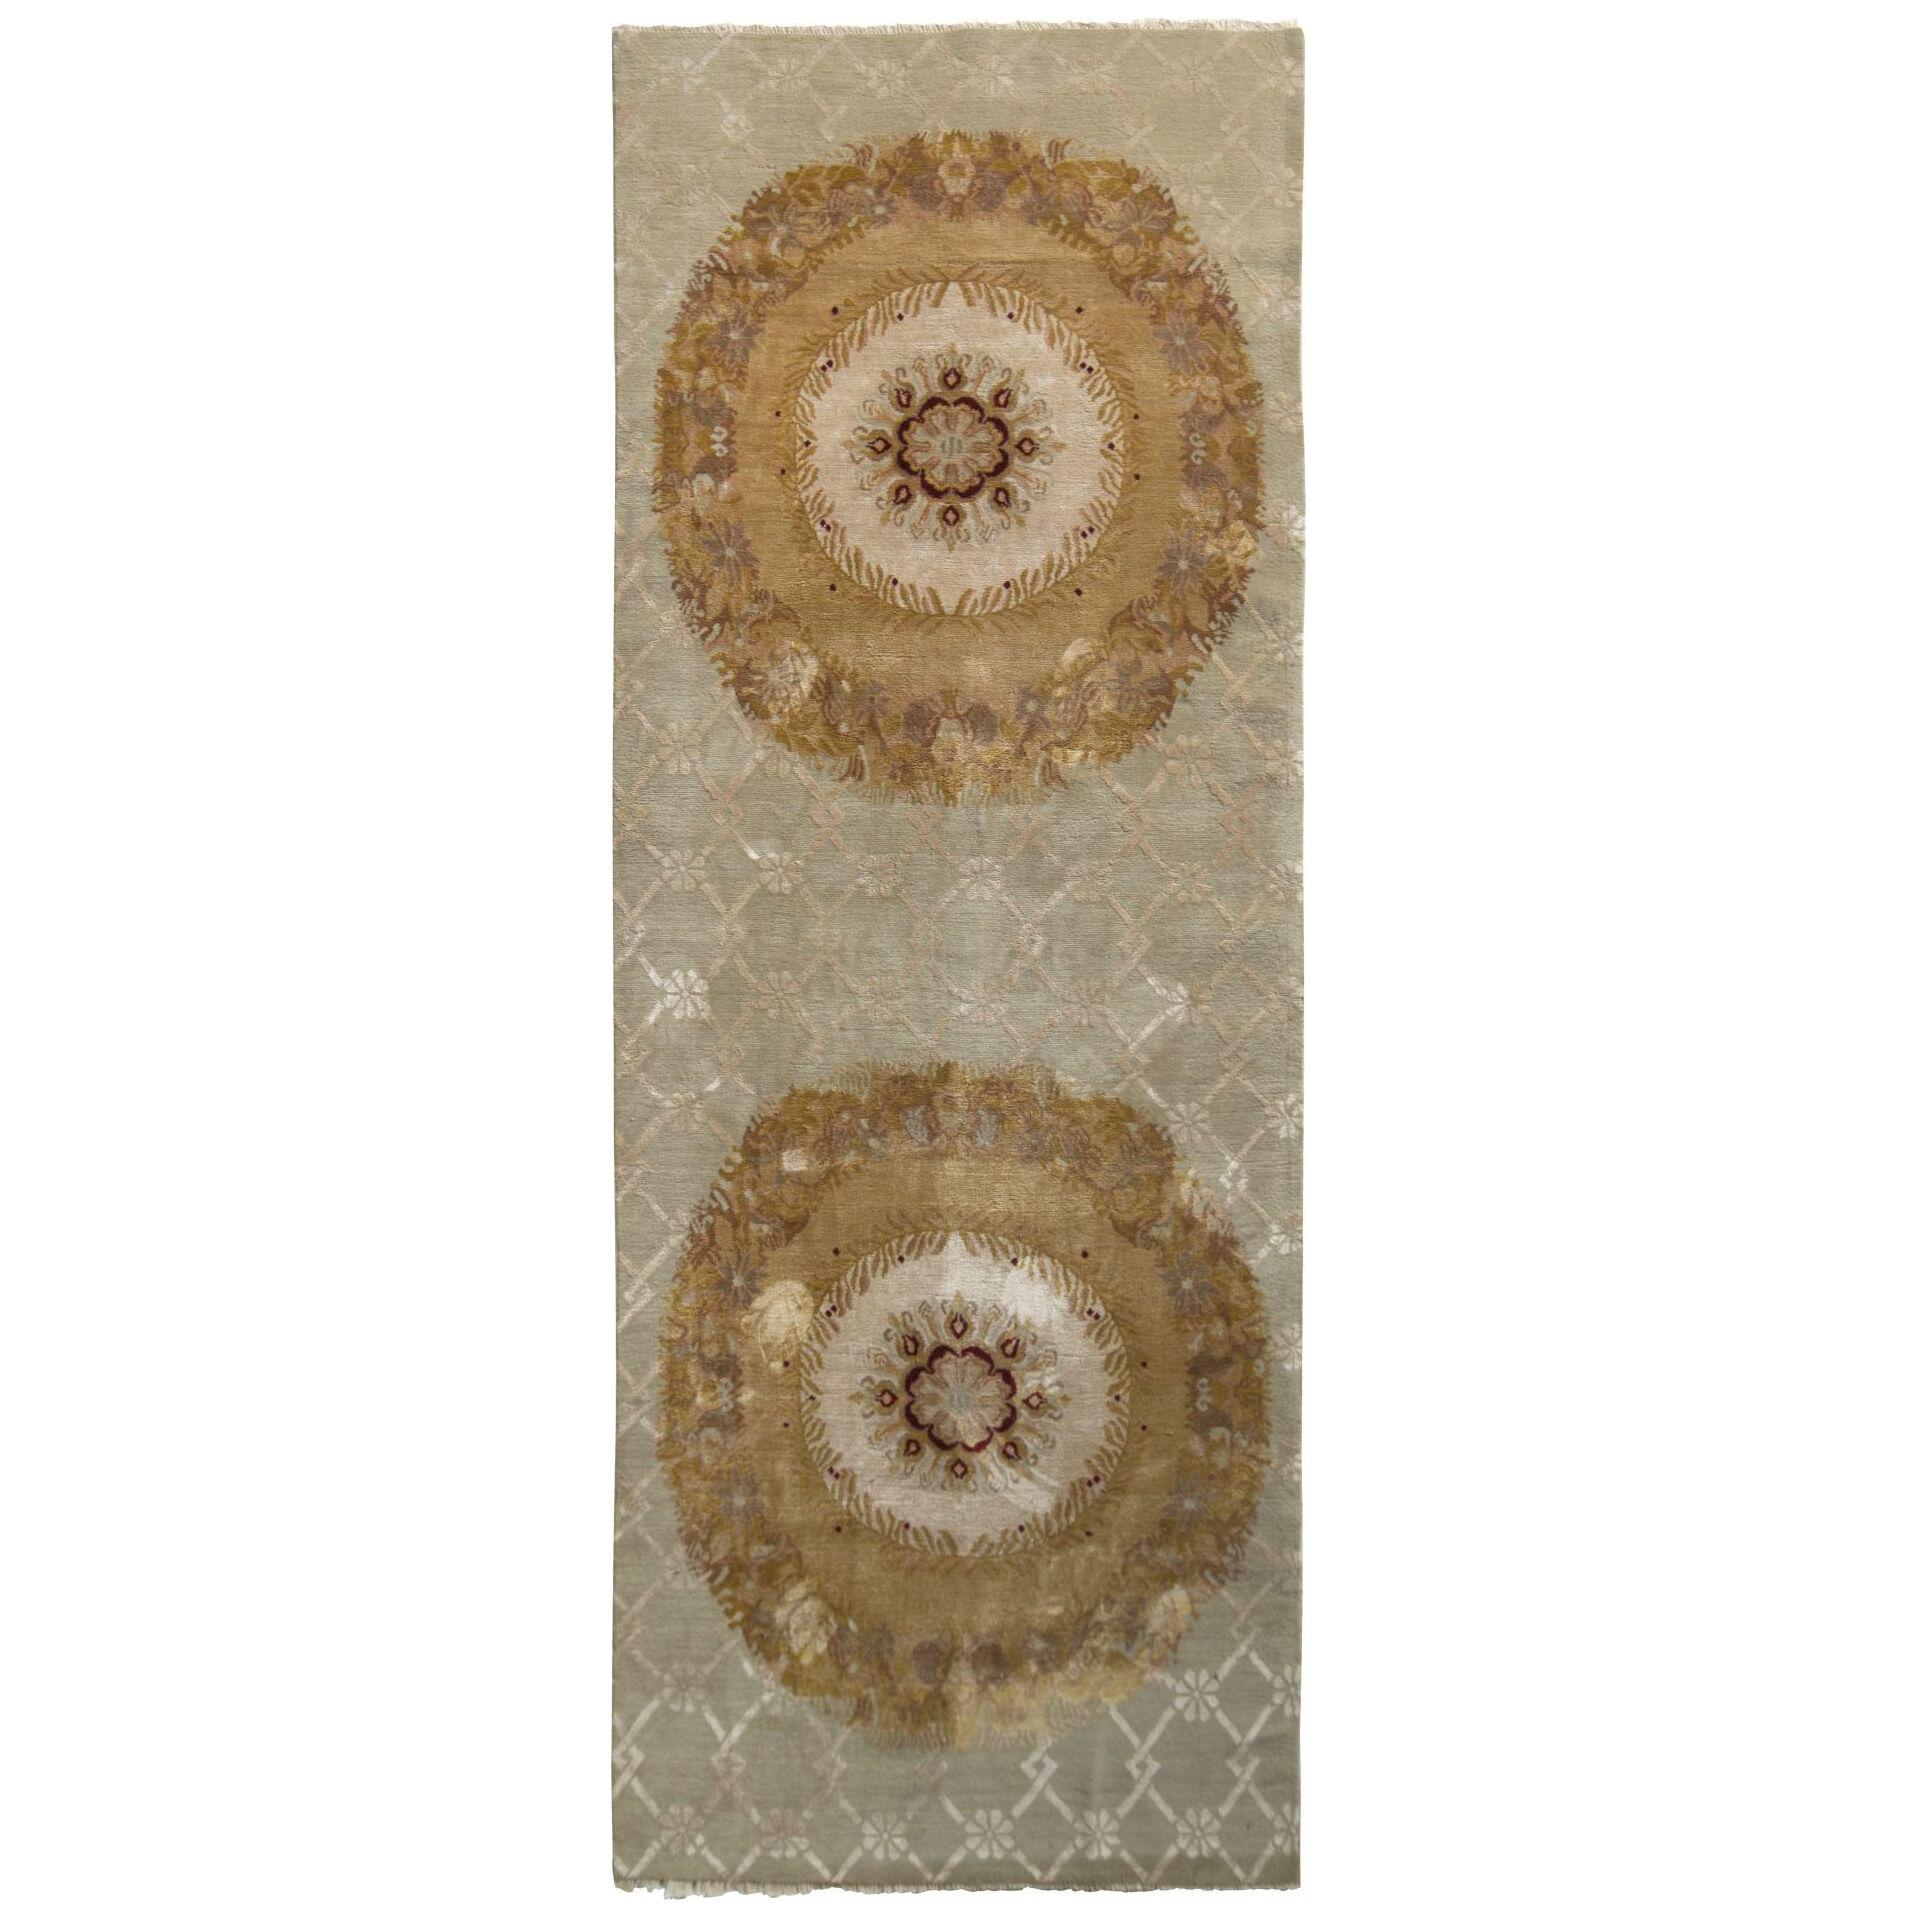 Rug & Kilim’s Aubusson Style Rug in Beige-Brown and Green Medallion Pattern